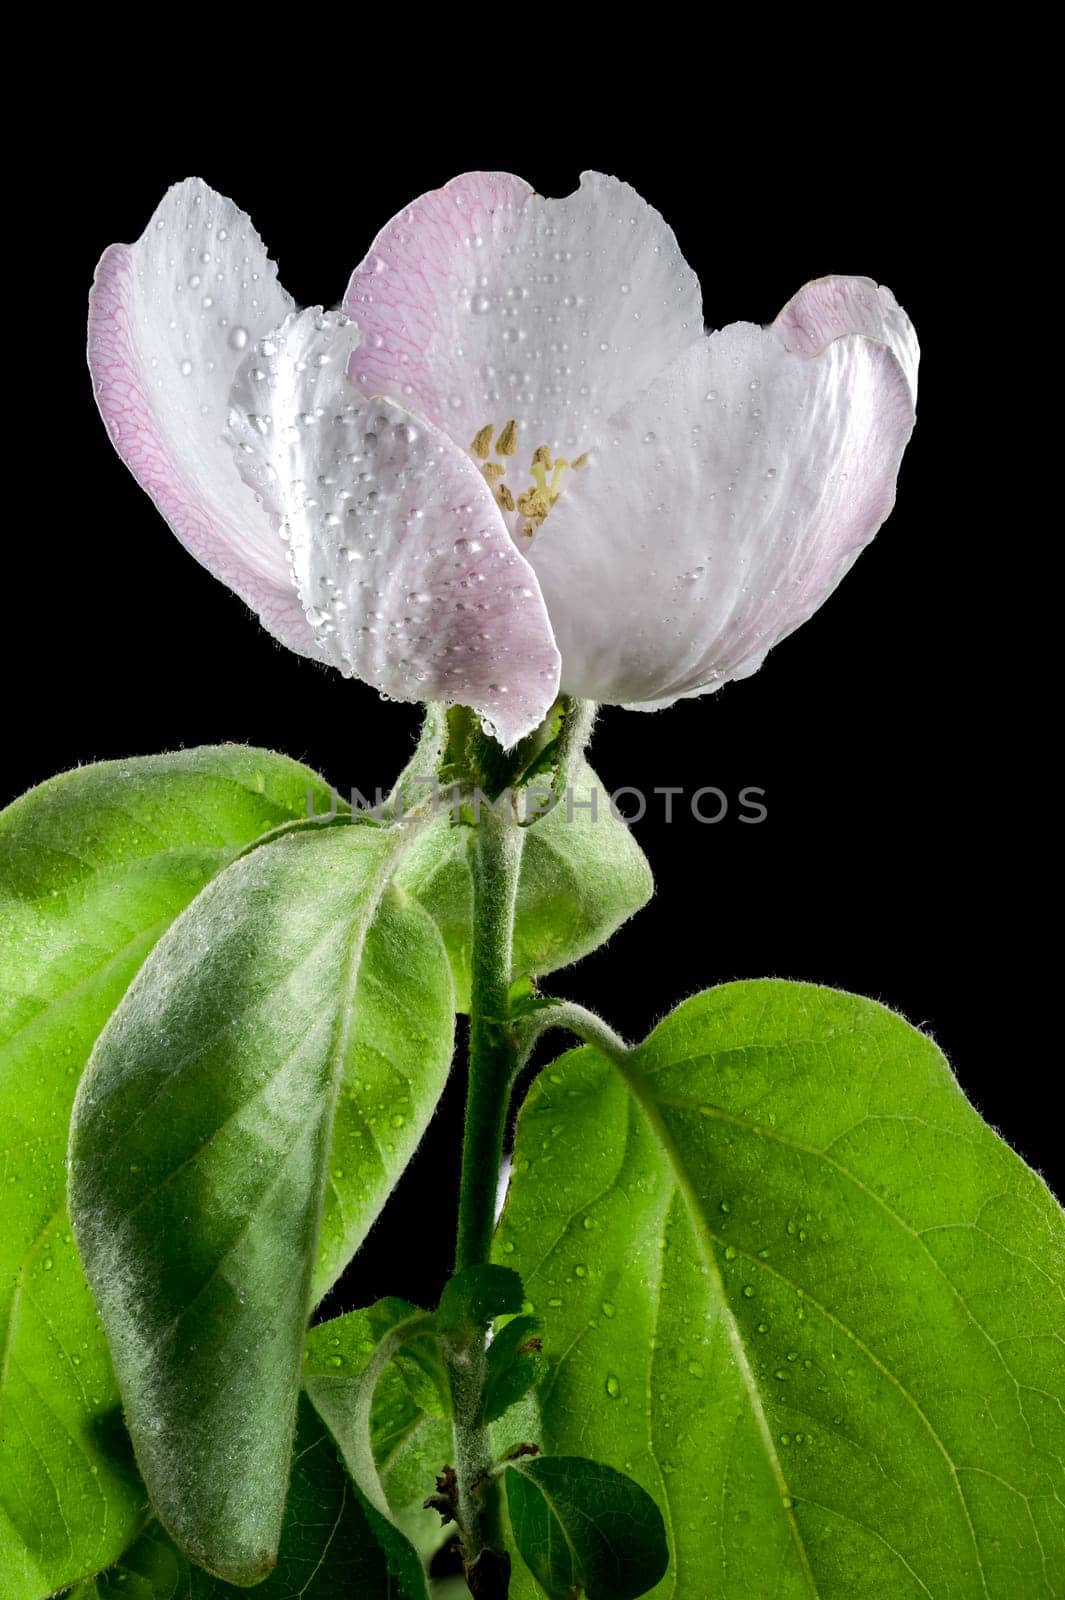 Blooming Quince tree flowers on a black background by Multipedia